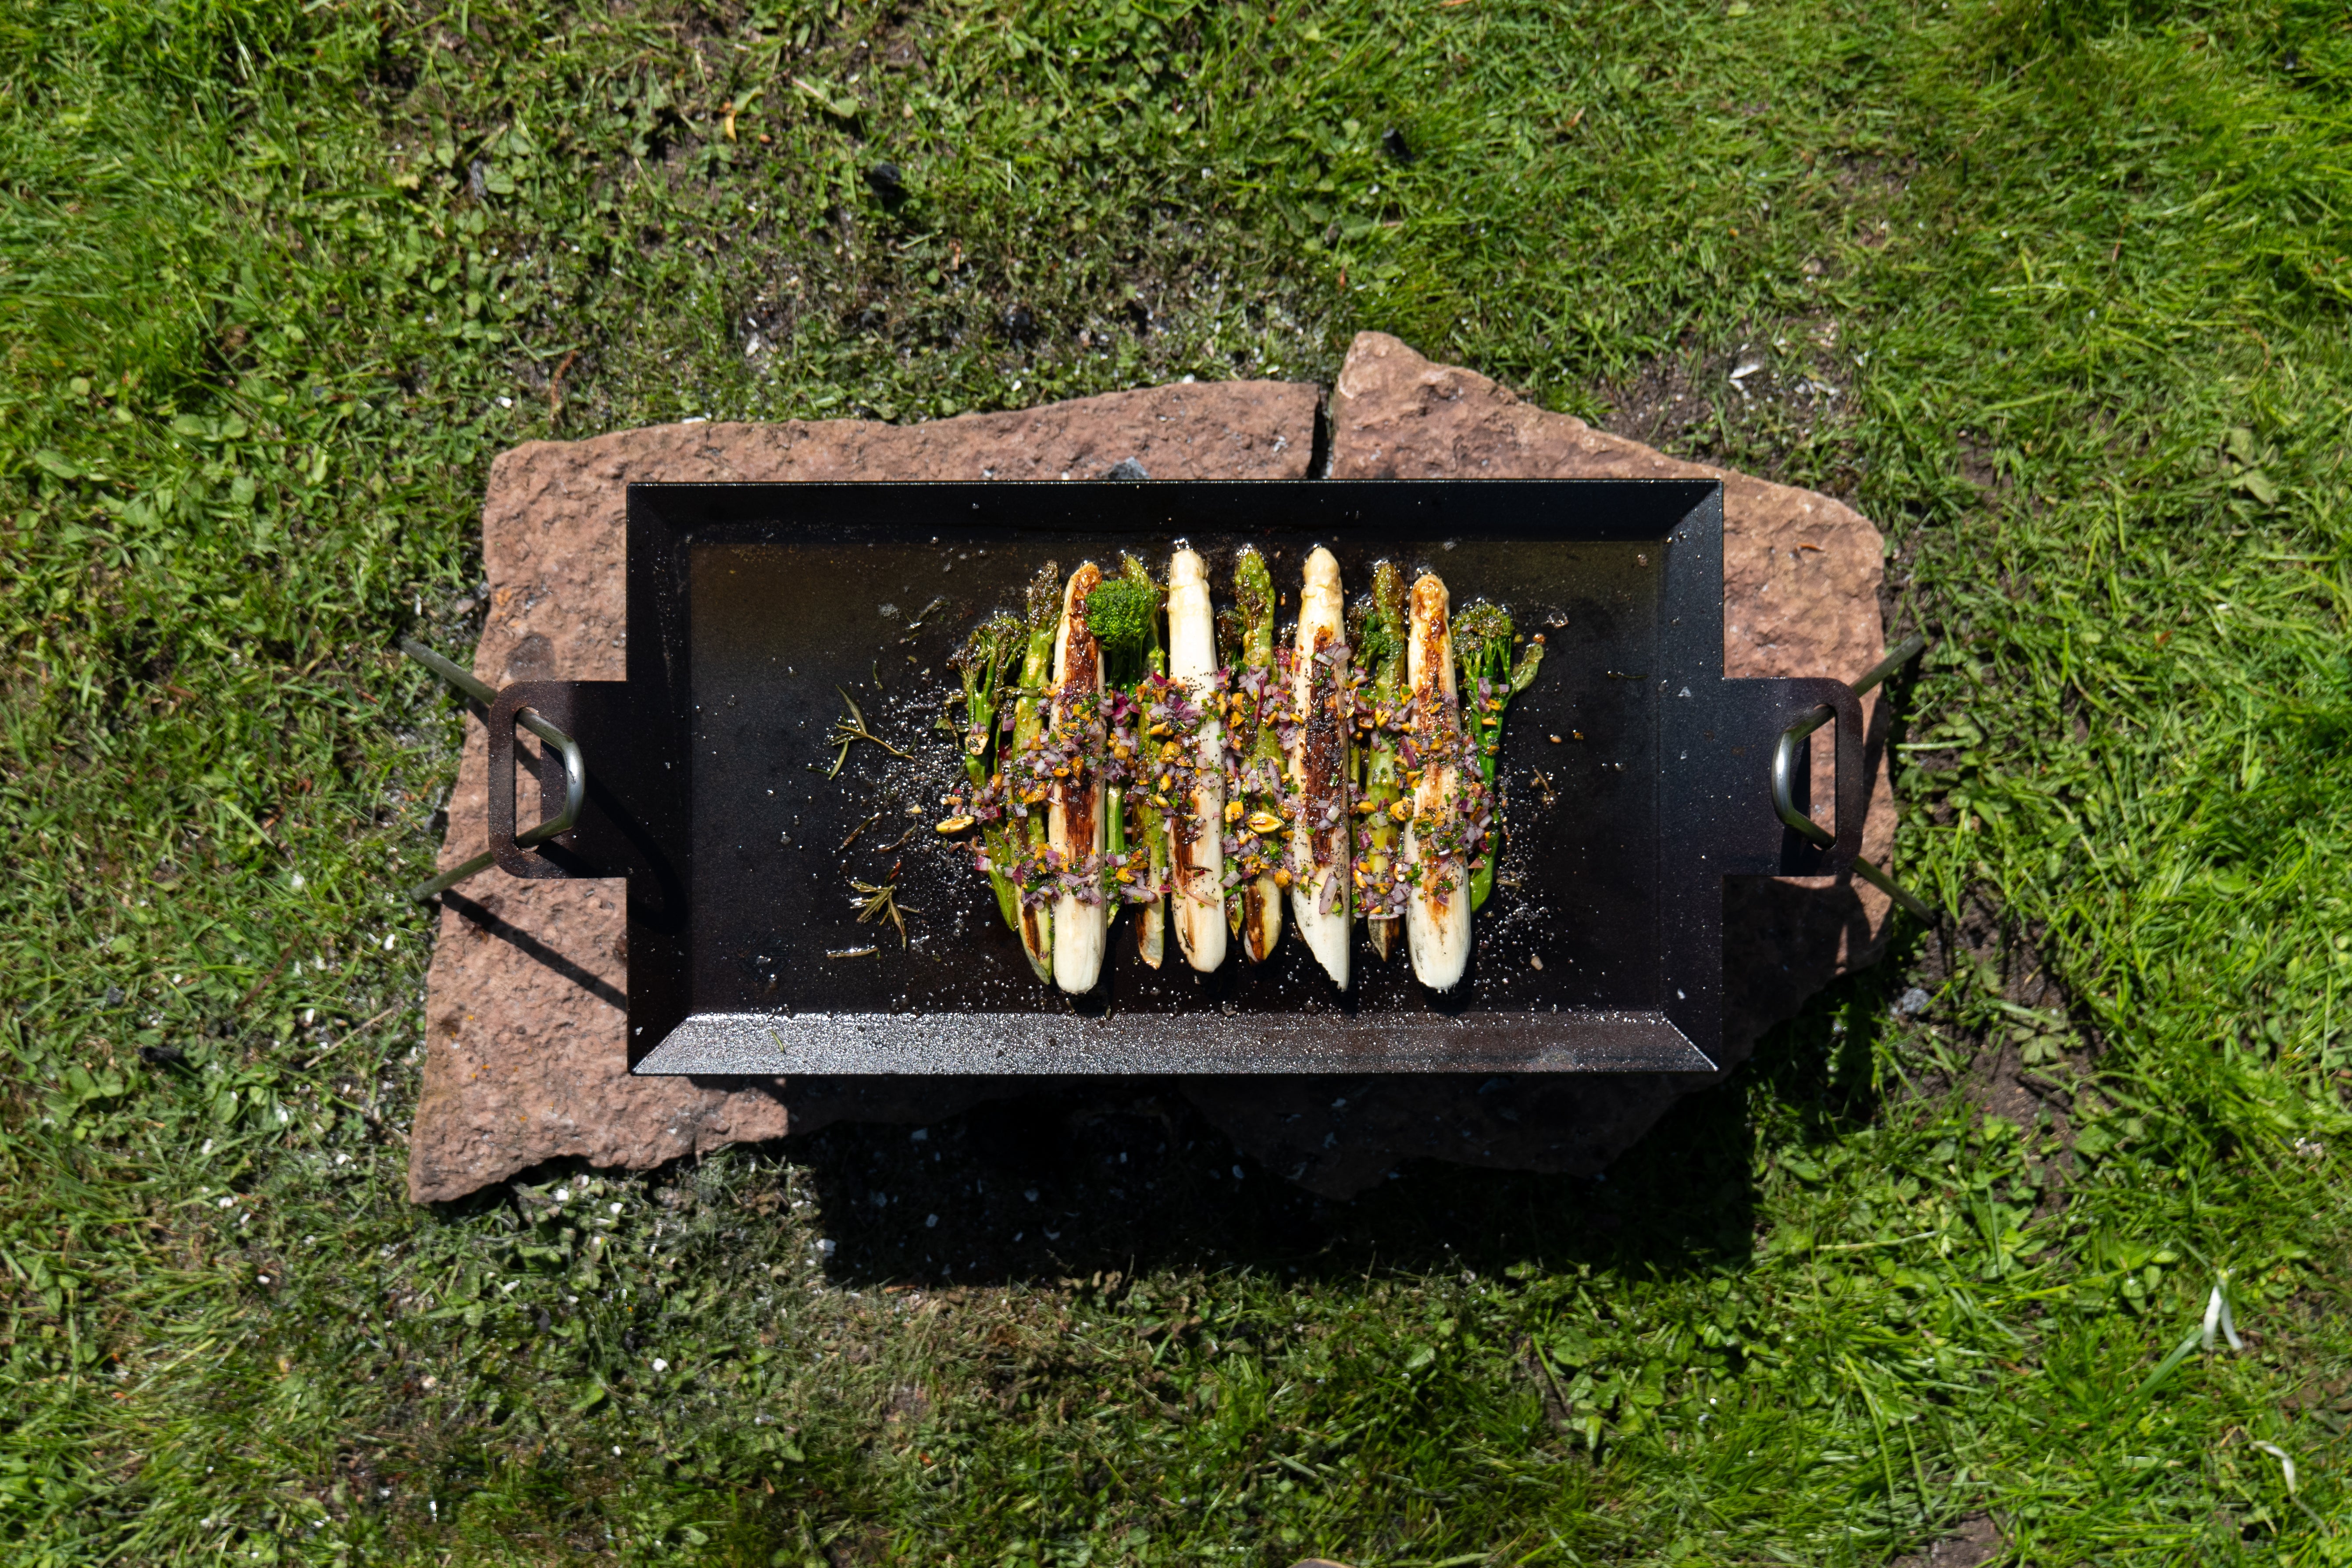 Thomas Rode's Grilled Asparagus with Birch Butter